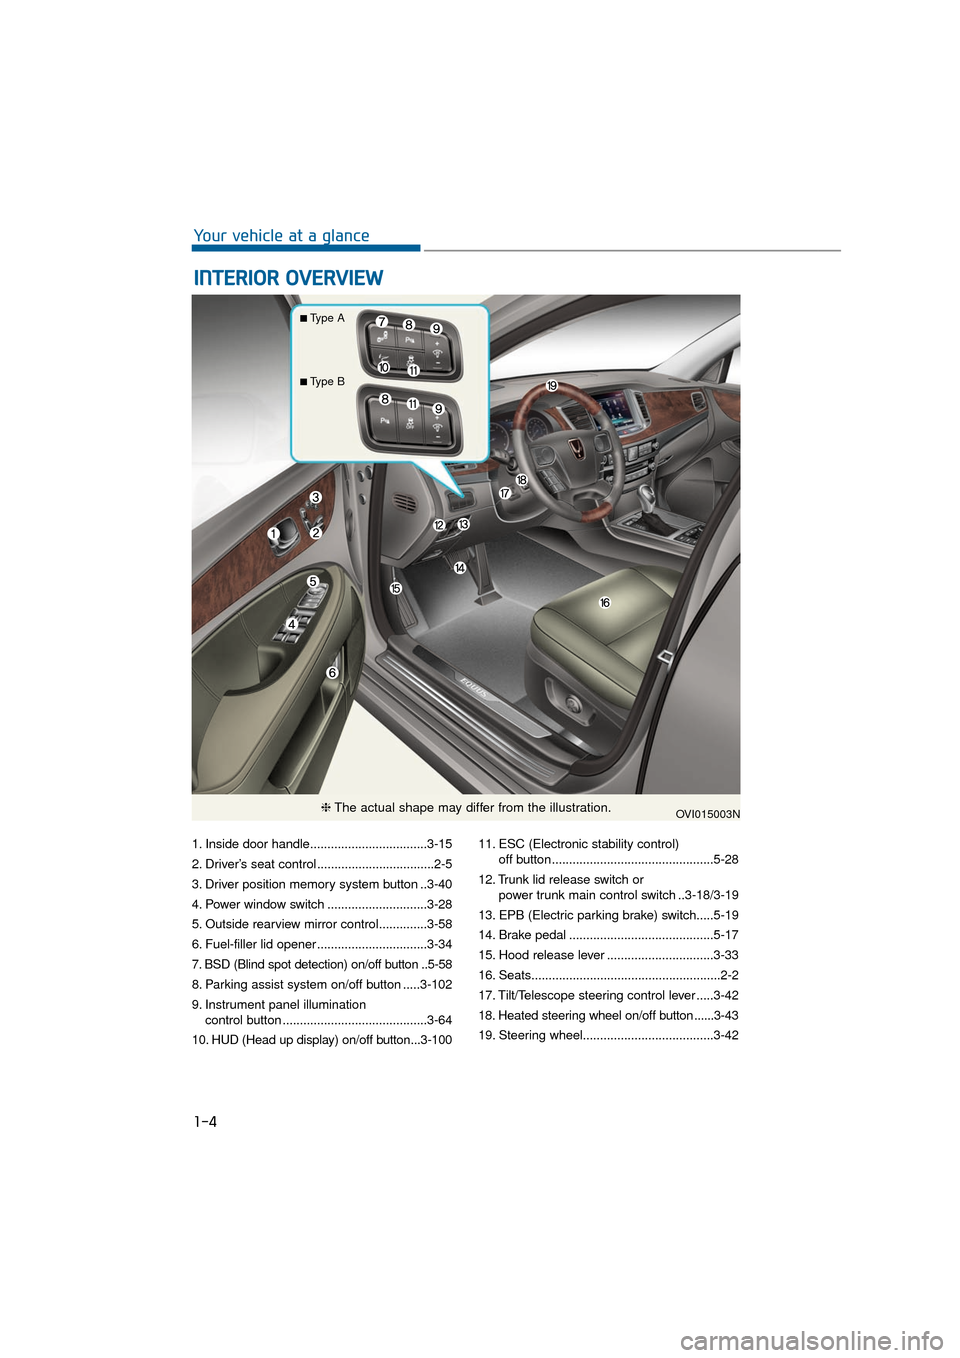 Hyundai Equus 2016 Owners Guide 1. Inside door handle..................................3-15
2. Driver’s seat control ..................................2-5
3. Driver position memory system button ..3-40
4. Power window switch .....